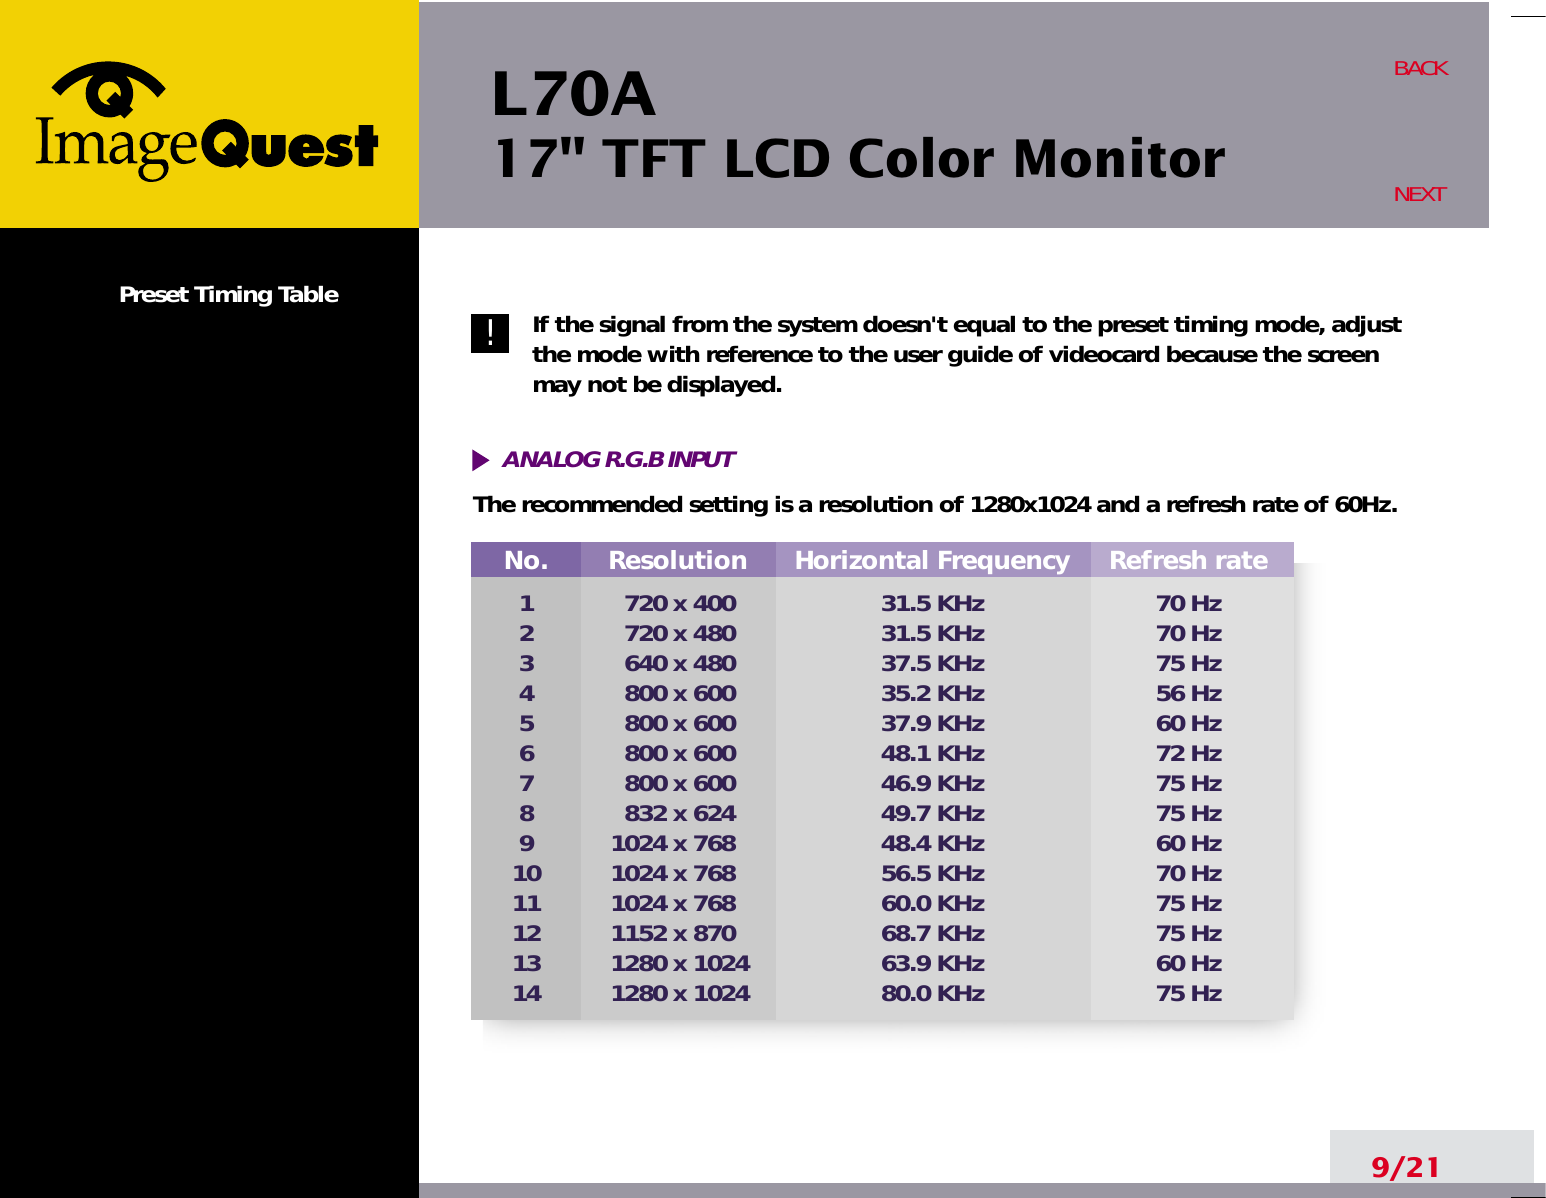 L70A17&quot; TFT LCD Color MonitorNo.1234567891011121314Resolution720 x 400720 x 480640 x 480 800 x 600800 x 600800 x 600800 x 600832 x 6241024 x 7681024 x 7681024 x 7681152 x 8701280 x 10241280 x 1024Horizontal Frequency31.5 KHz31.5 KHz37.5 KHz35.2 KHz37.9 KHz48.1 KHz46.9 KHz49.7 KHz48.4 KHz56.5 KHz60.0 KHz68.7 KHz63.9 KHz80.0 KHzRefresh rate70 Hz70 Hz75 Hz56 Hz60 Hz72 Hz75 Hz75 Hz60 Hz70 Hz75 Hz75 Hz60 Hz75 HzPreset Timing Table If the signal from the system doesn&apos;t equal to the preset timing mode, adjustthe mode with reference to the user guide of videocard because the screenmay not be displayed.The recommended setting is a resolution of 1280x1024 and a refresh rate of 60Hz.9/21BACKNEXT!ANALOG R.G.B INPUT 